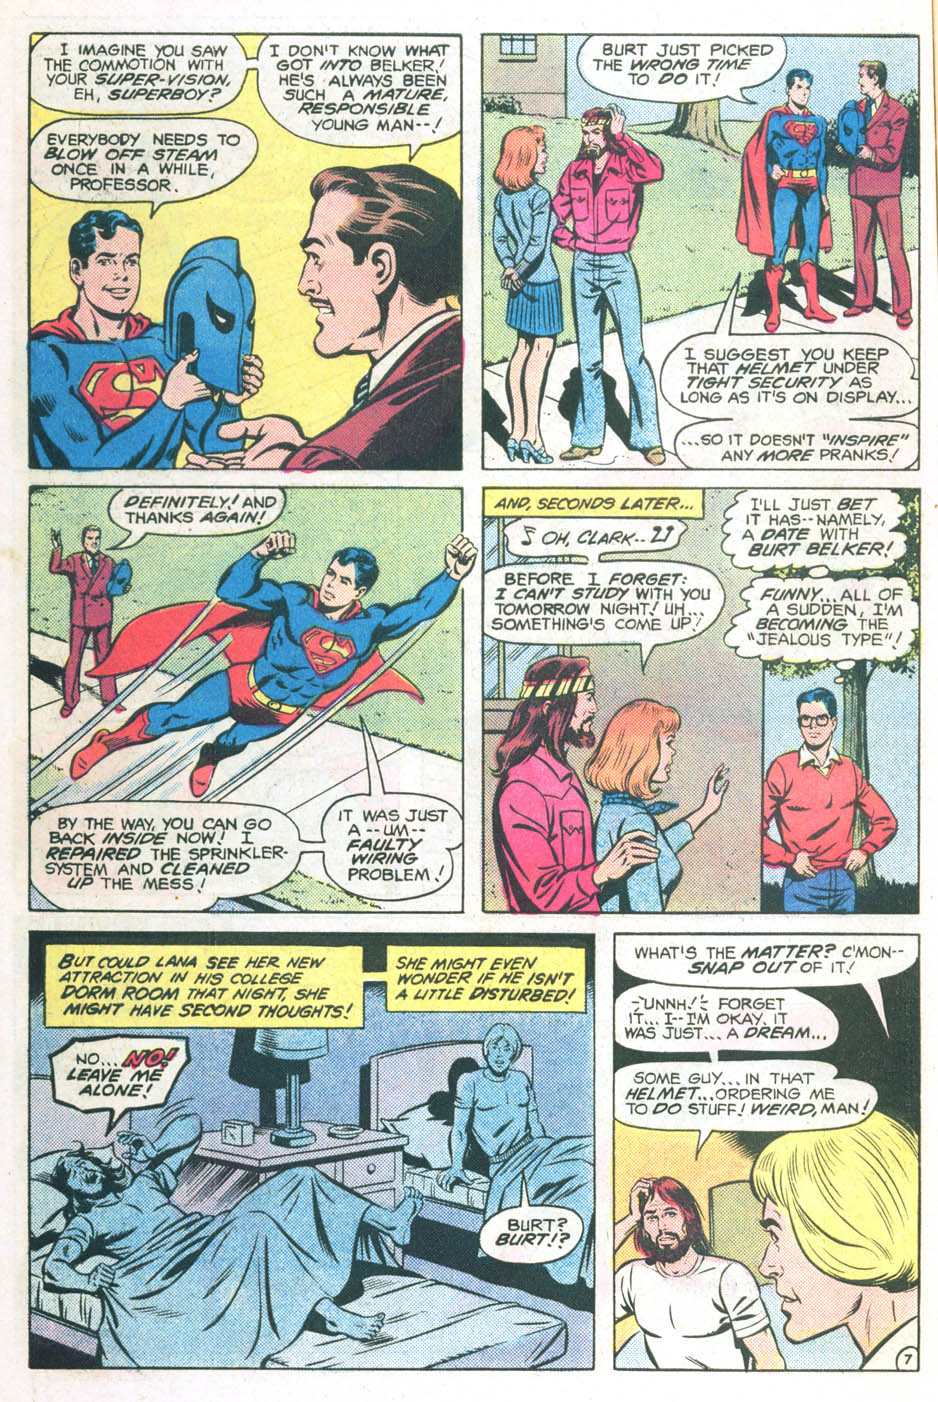 The New Adventures of Superboy 25 Page 7